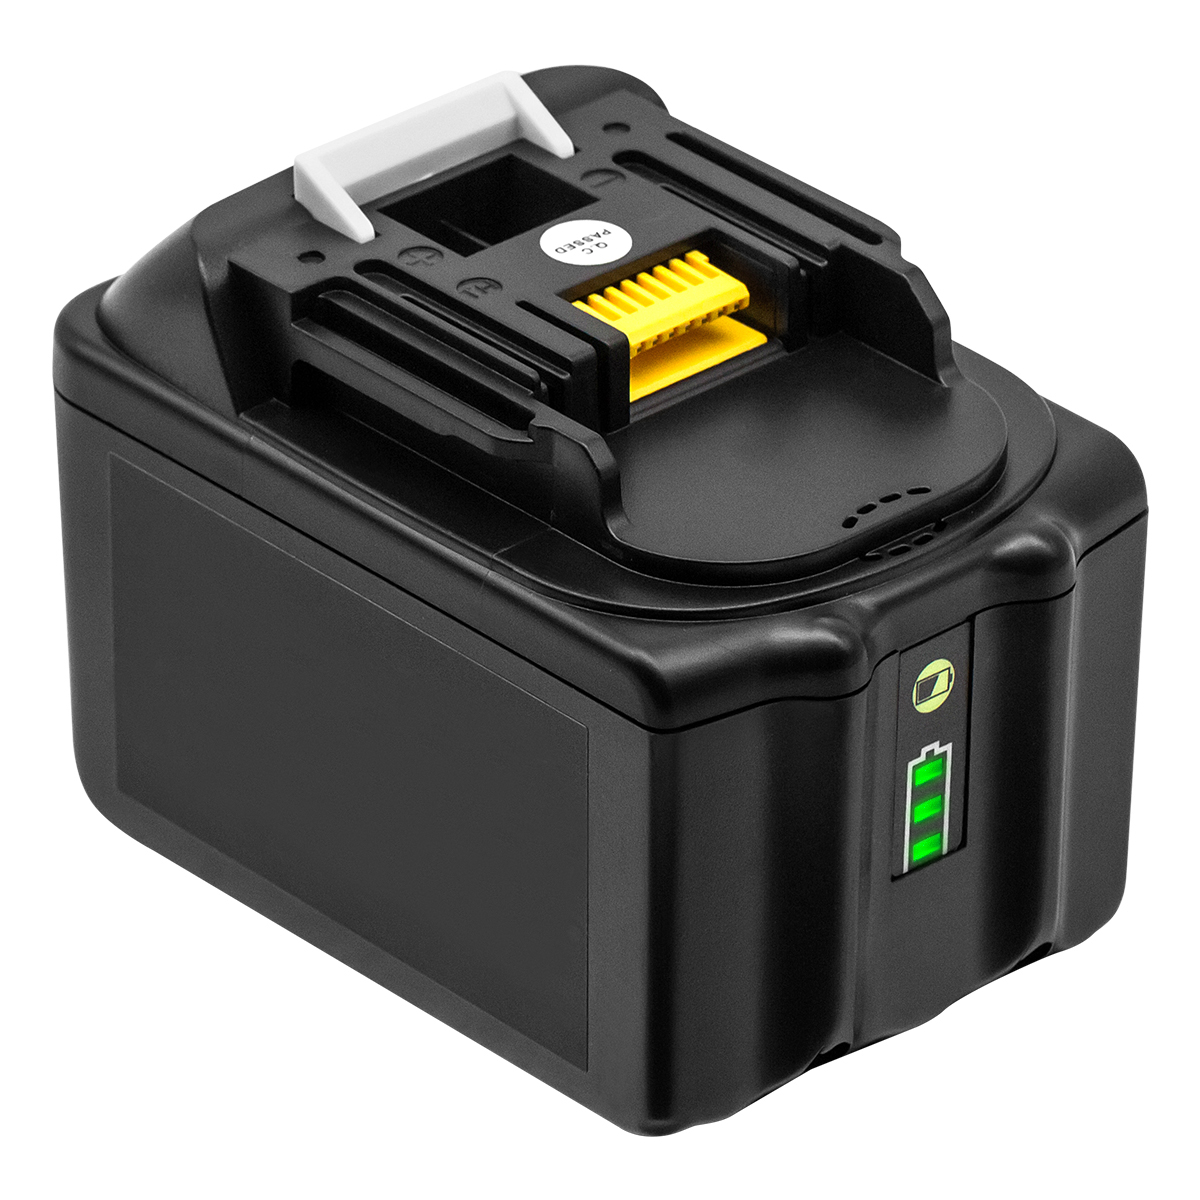 18V-90Ah-Power-Tool-Battery-Replacement-For-Makita-BL1860-BL1850-BL1840-BL1830-BL1845-194205-3-19430-1668187-2